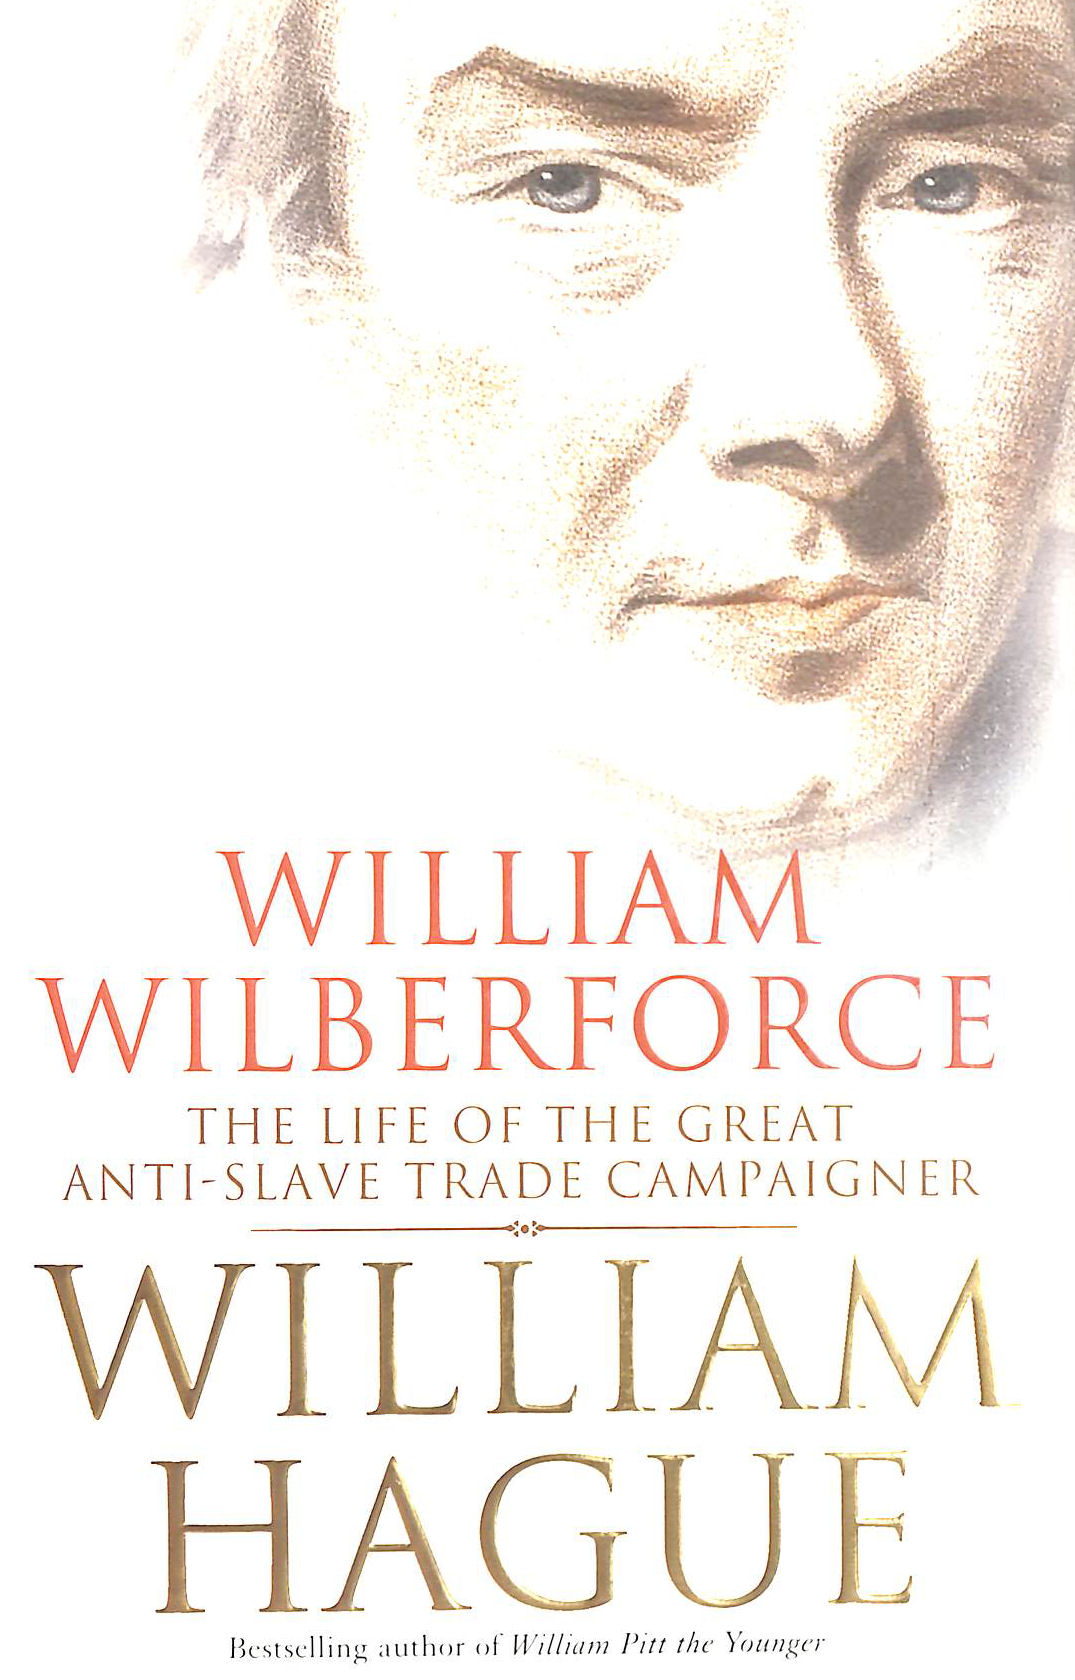 HAGUE, WILLIAM - William Wilberforce: The Life of the Great Anti-Slave Trade Campaigner